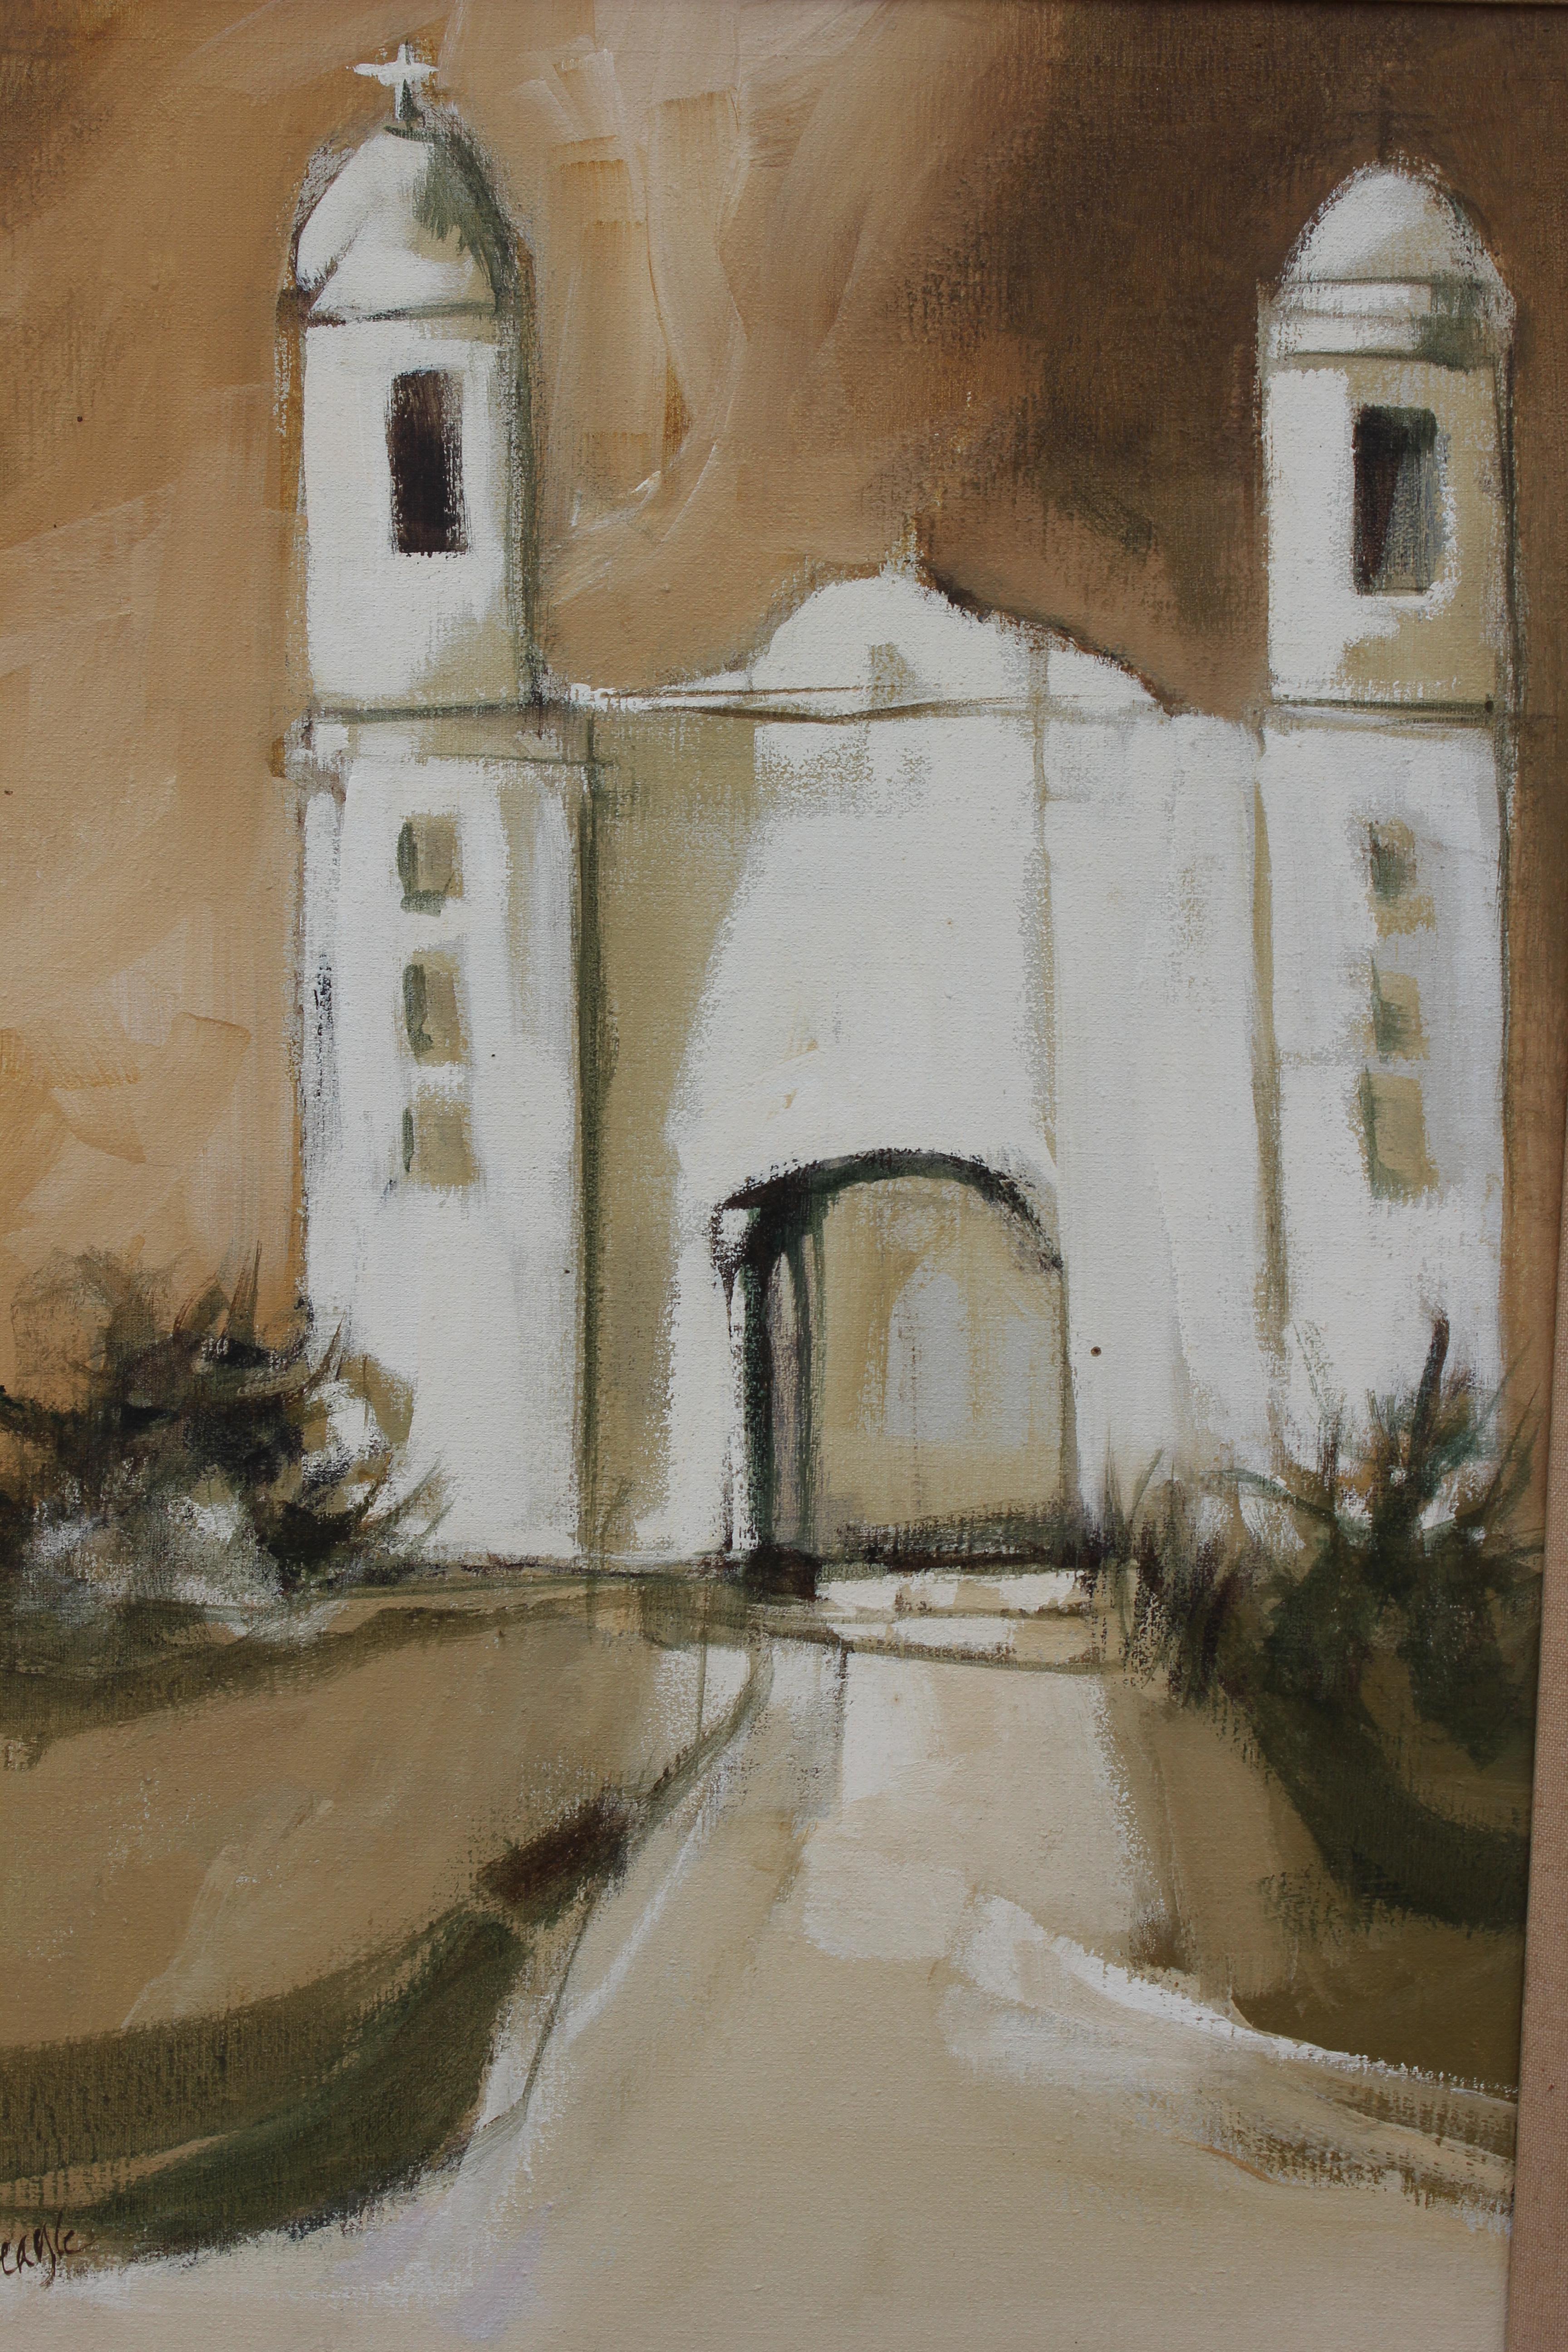 Abstract Architectural View of a Church - Painting by Jerry V. Seagle